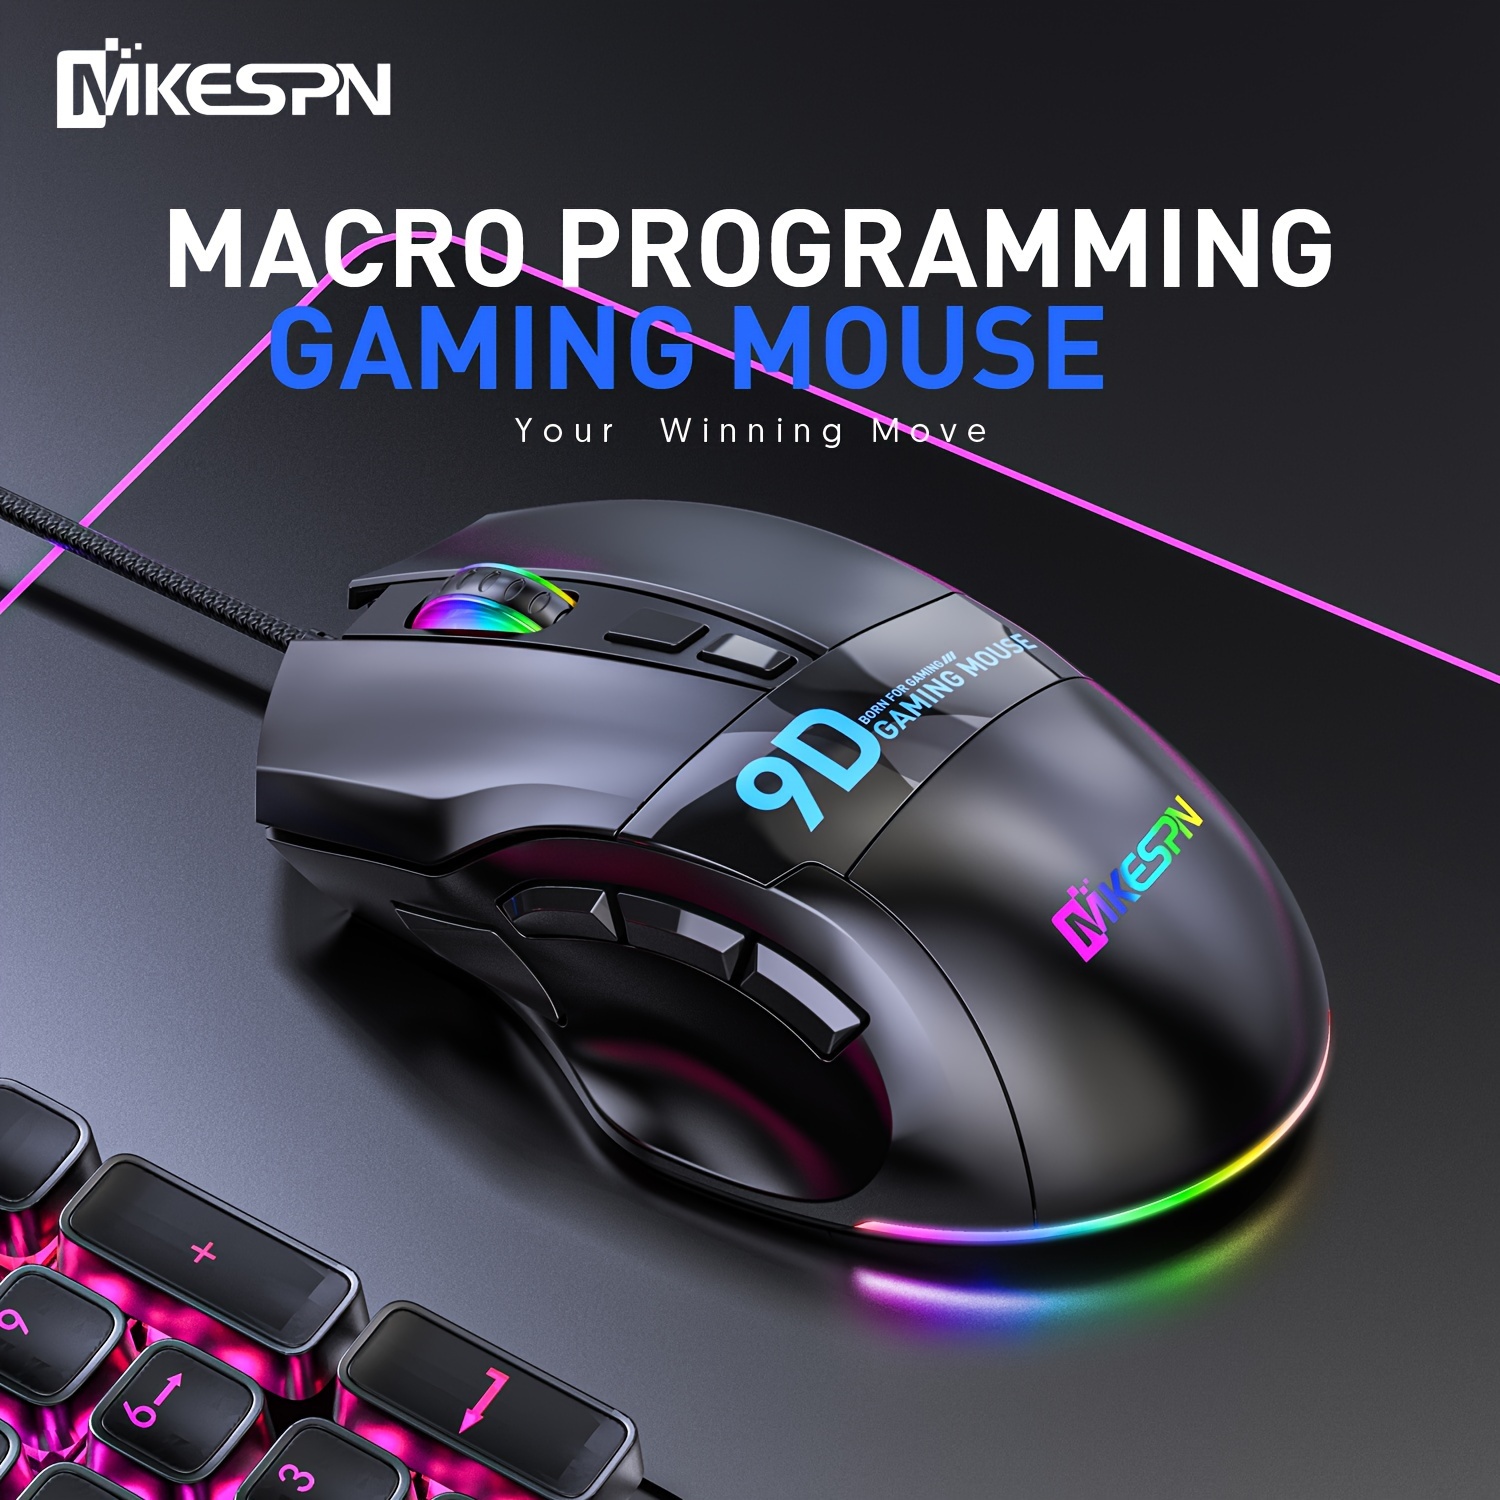 

Gaming Mouse With Multiple Keys, 9-key Rgb Wired Macro Definition Gaming Mouse